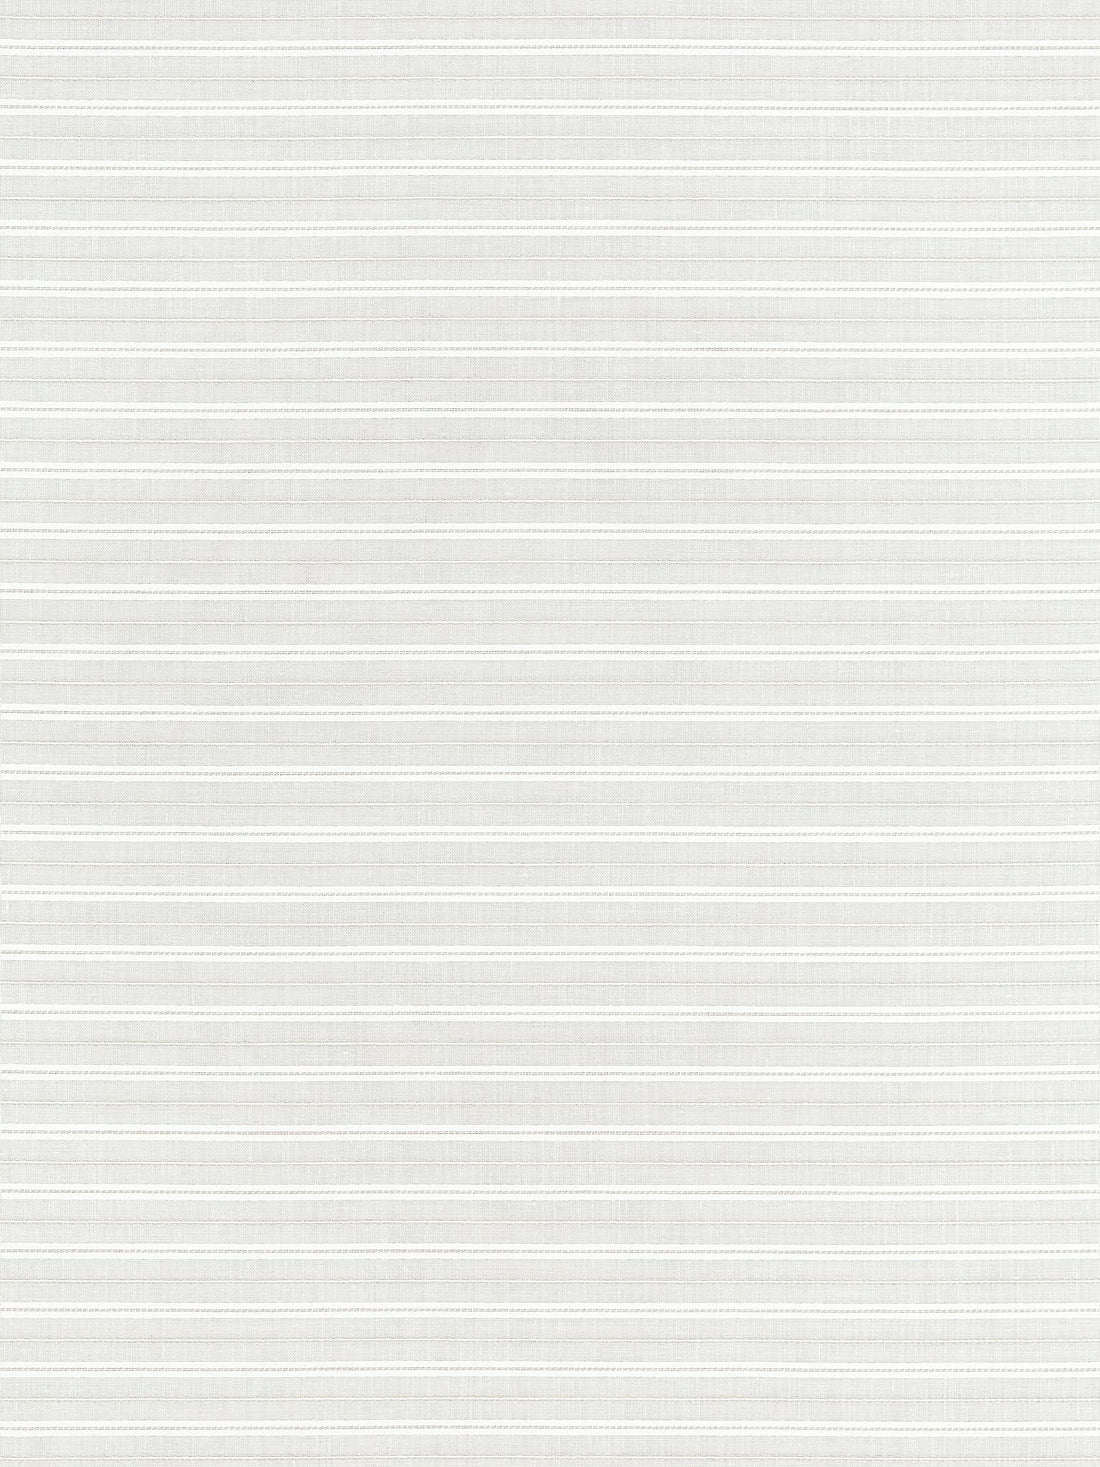 Harbor Stripe Sheer fabric in whelk color - pattern number SC 000127200 - by Scalamandre in the Scalamandre Fabrics Book 1 collection